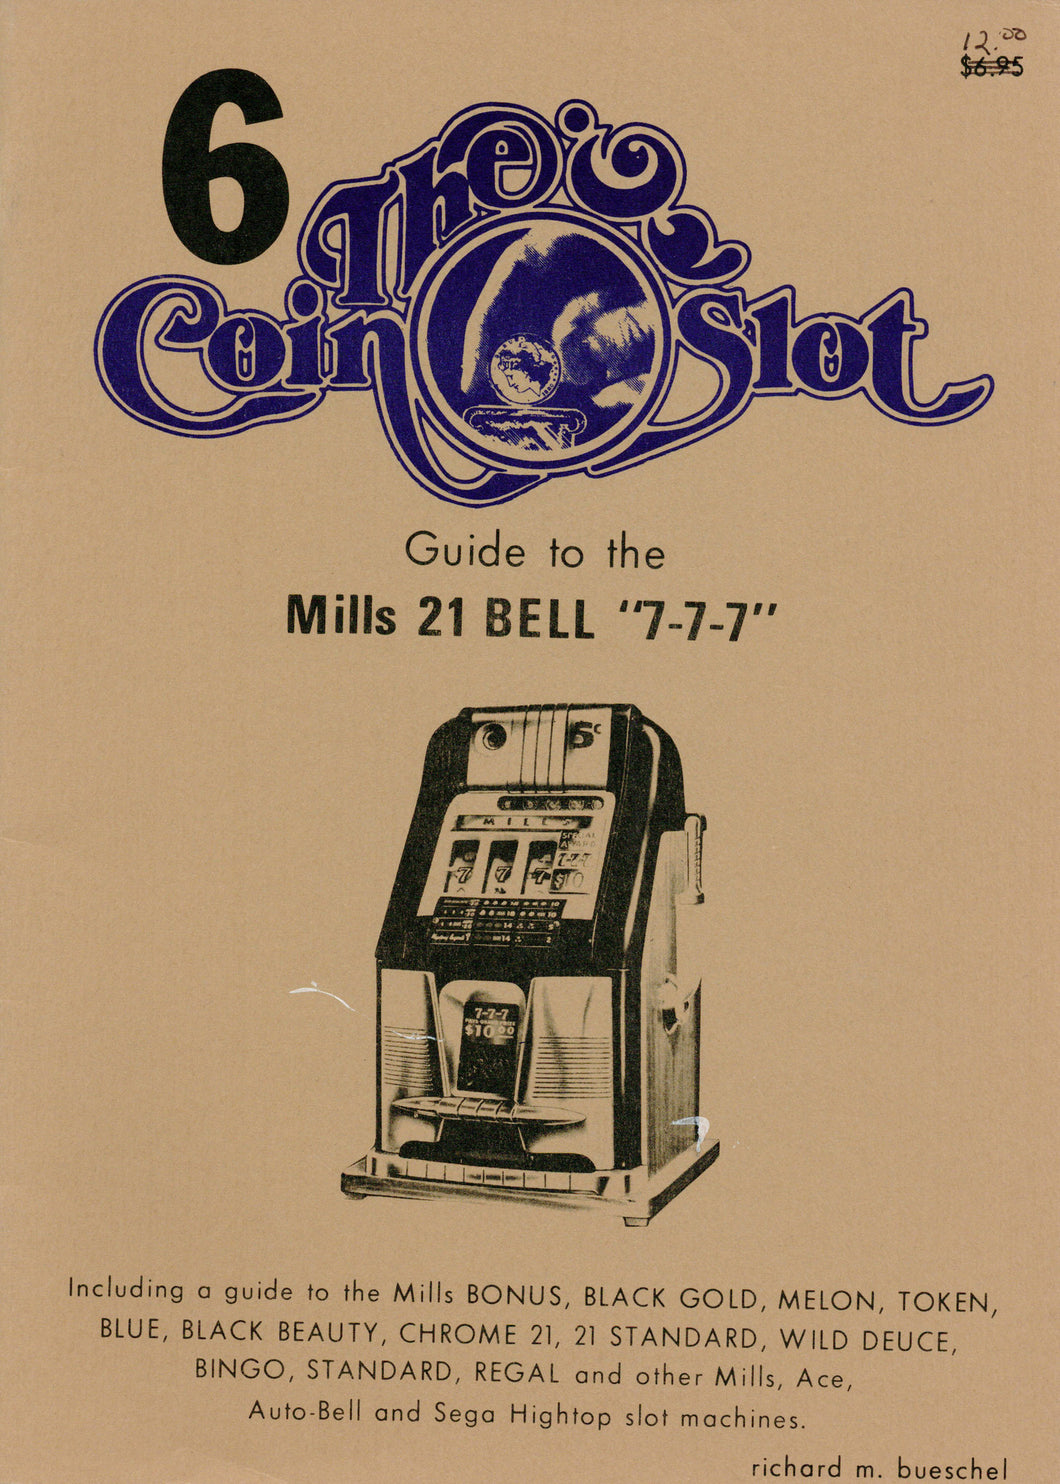 Coin Slot # 6. Guide to the Mills 21 Bell 